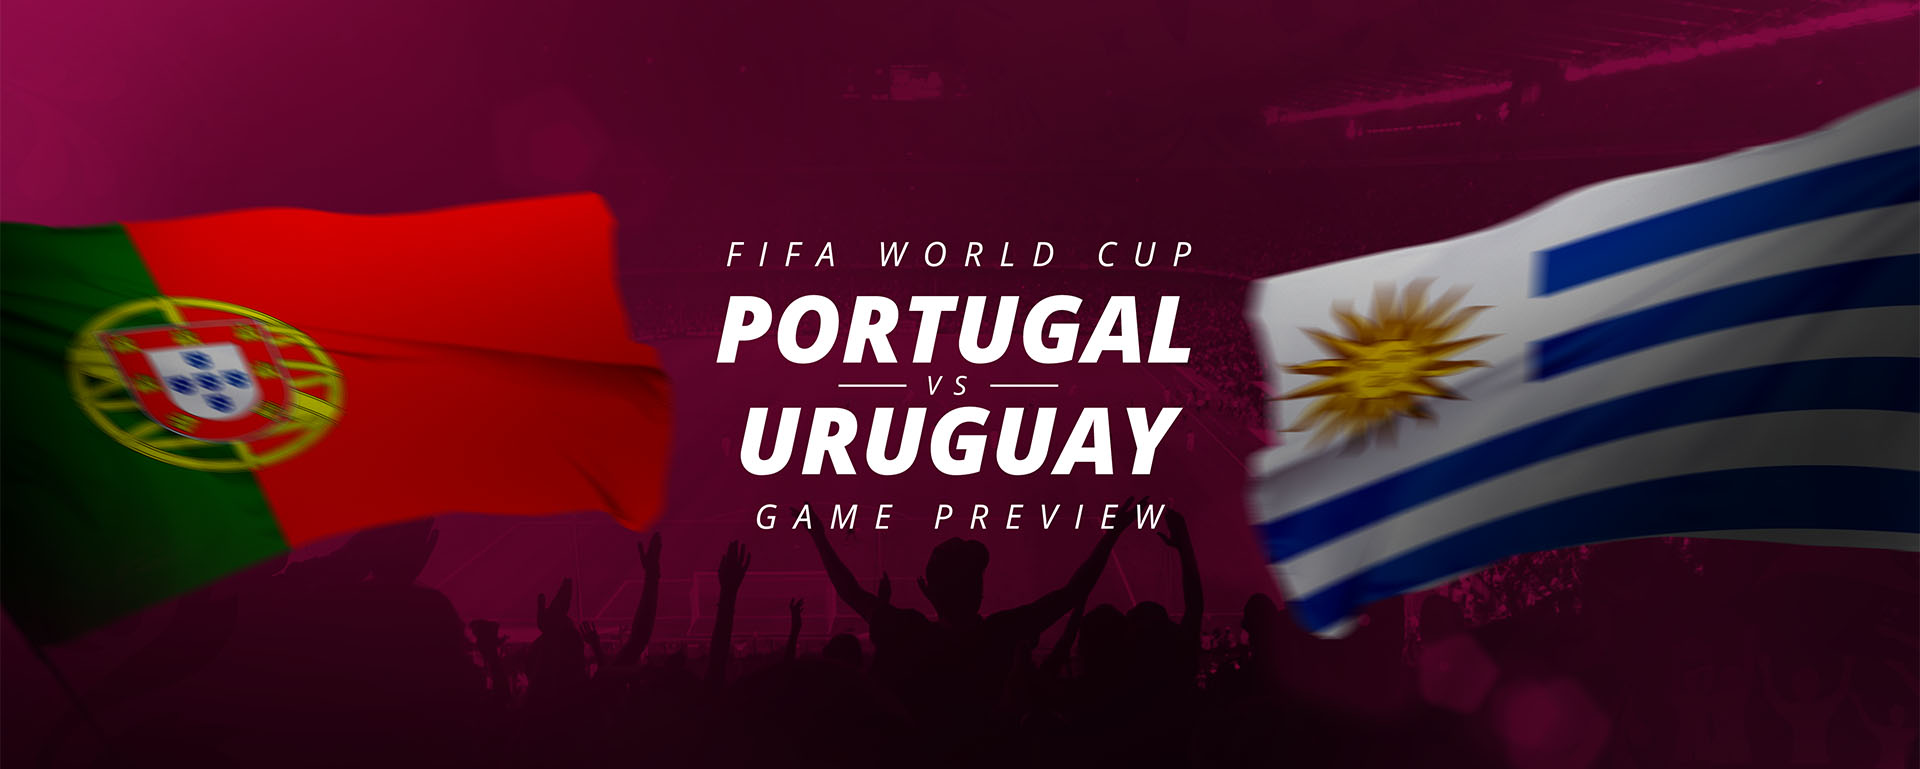 FIFA WORLD CUP: PORTUGAL V URUGUAY – GAME PREVIEW